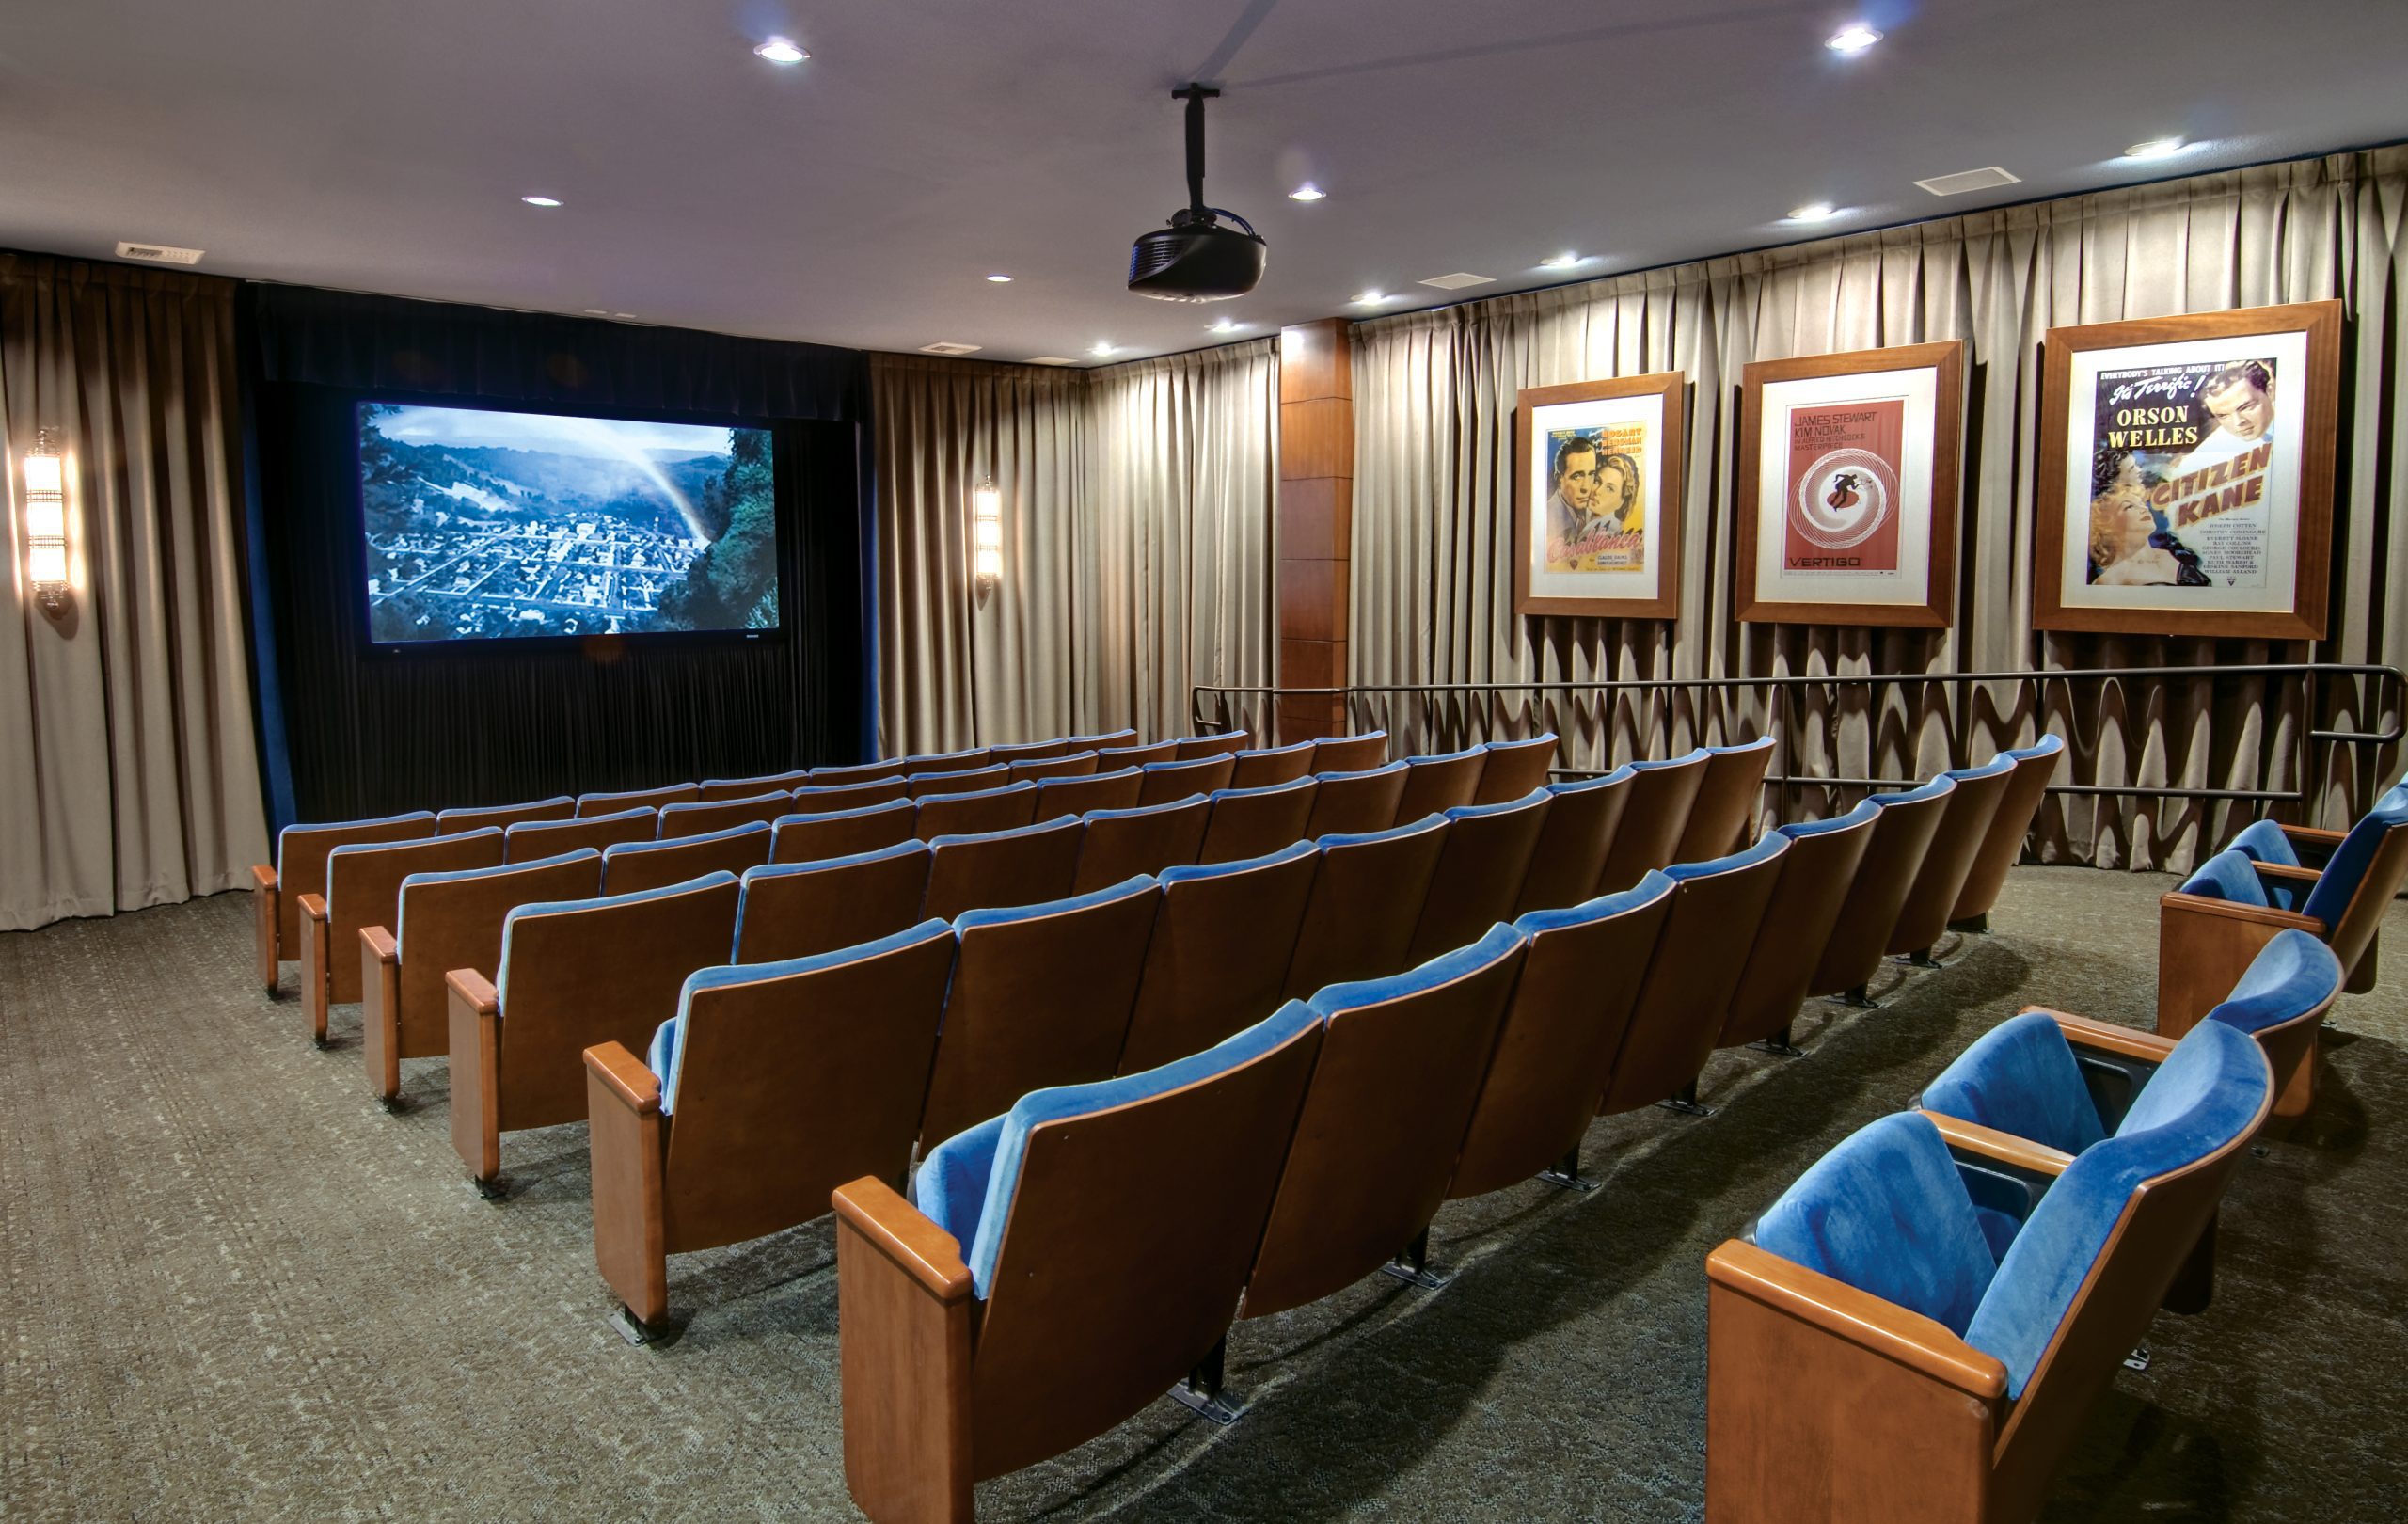 movie theater in a retirement community with blue chairs and 5 rows